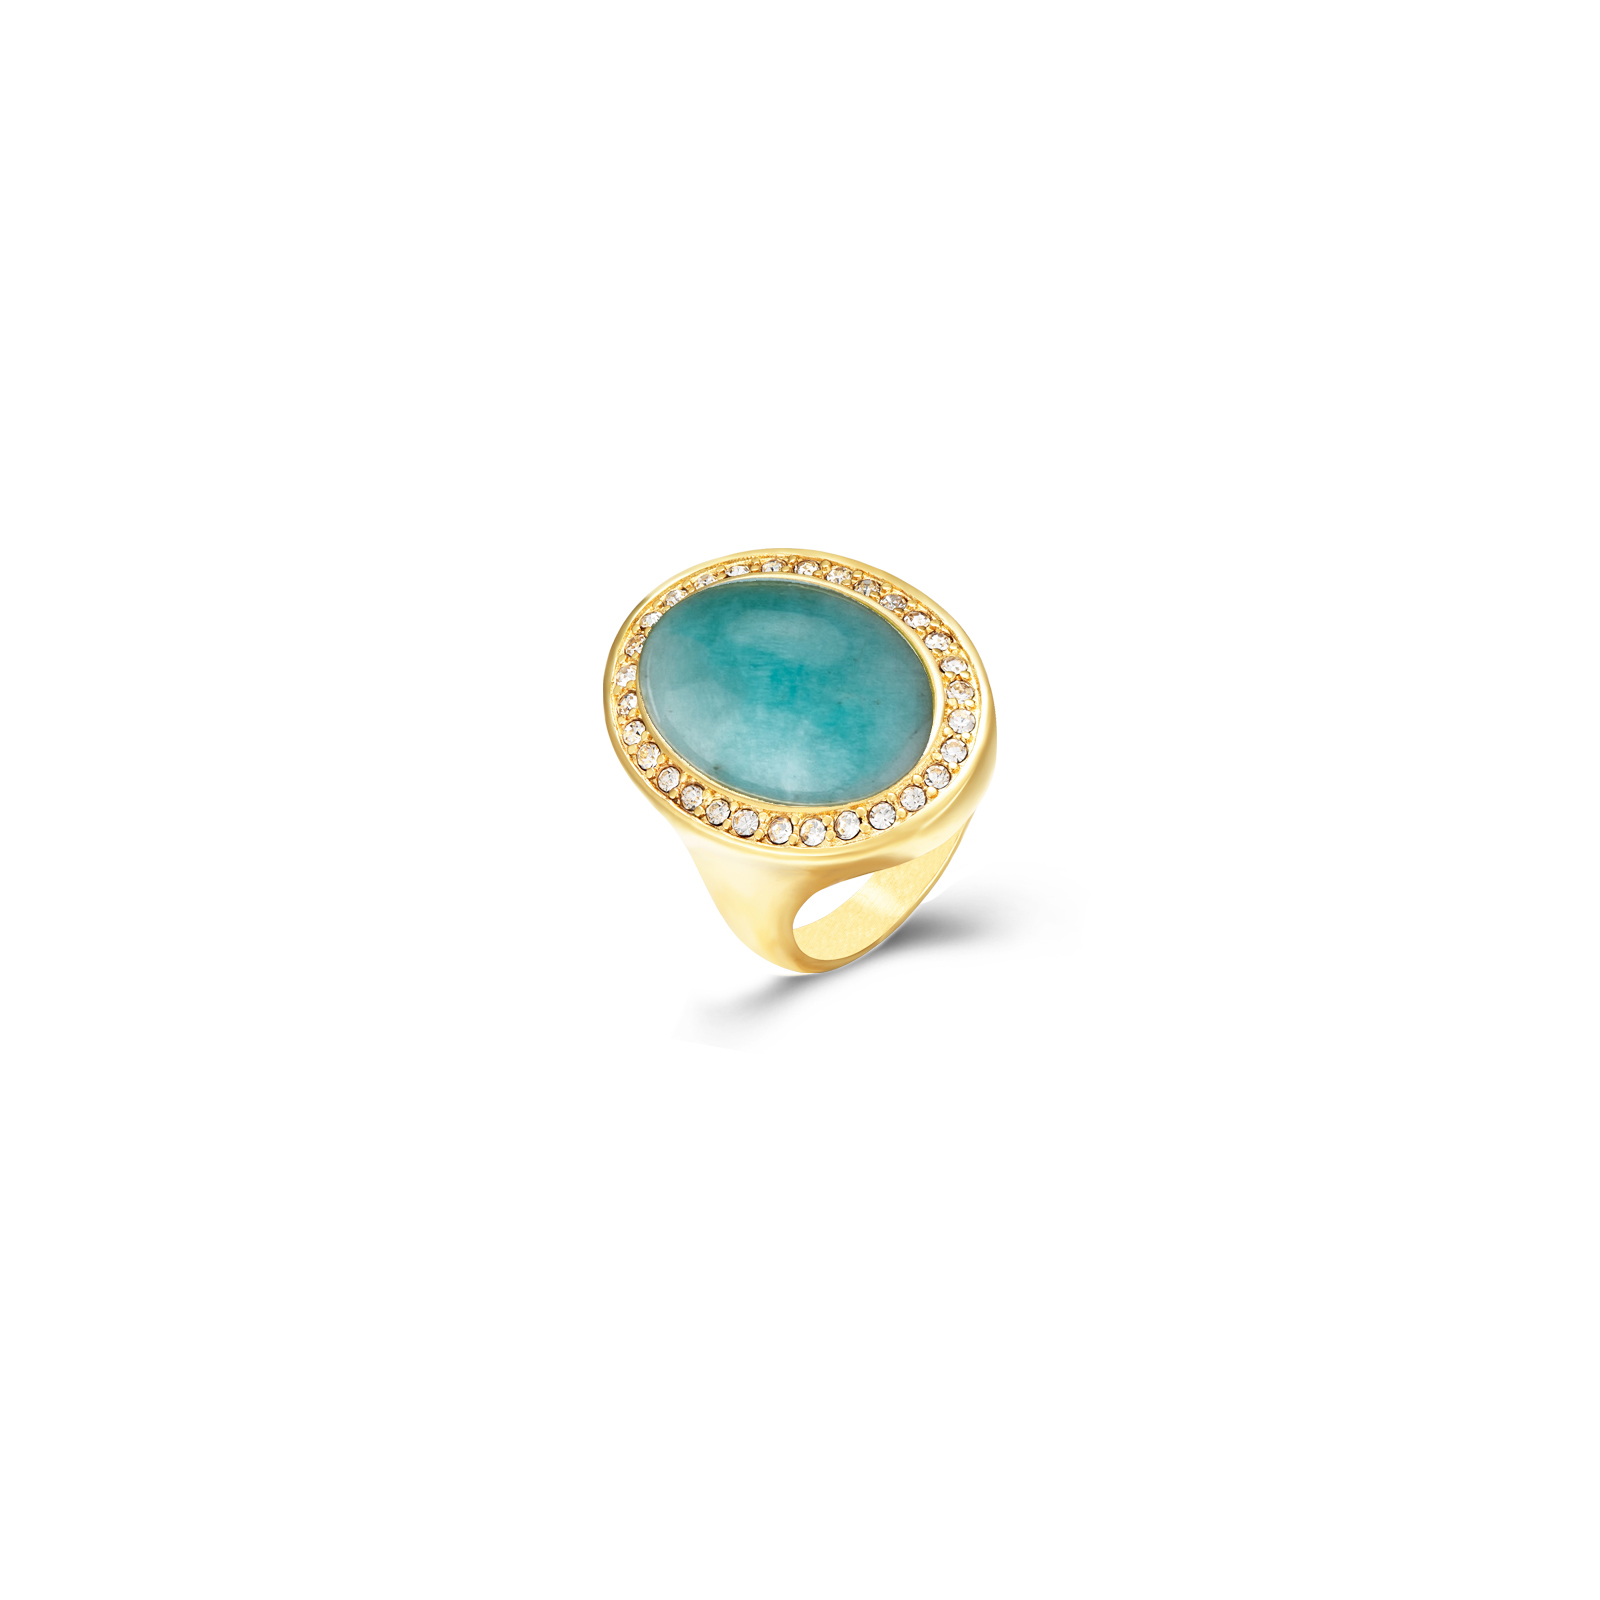 Steel Stones Rings Steel Mineral Ring - Amazonite Oval - Gold Plated